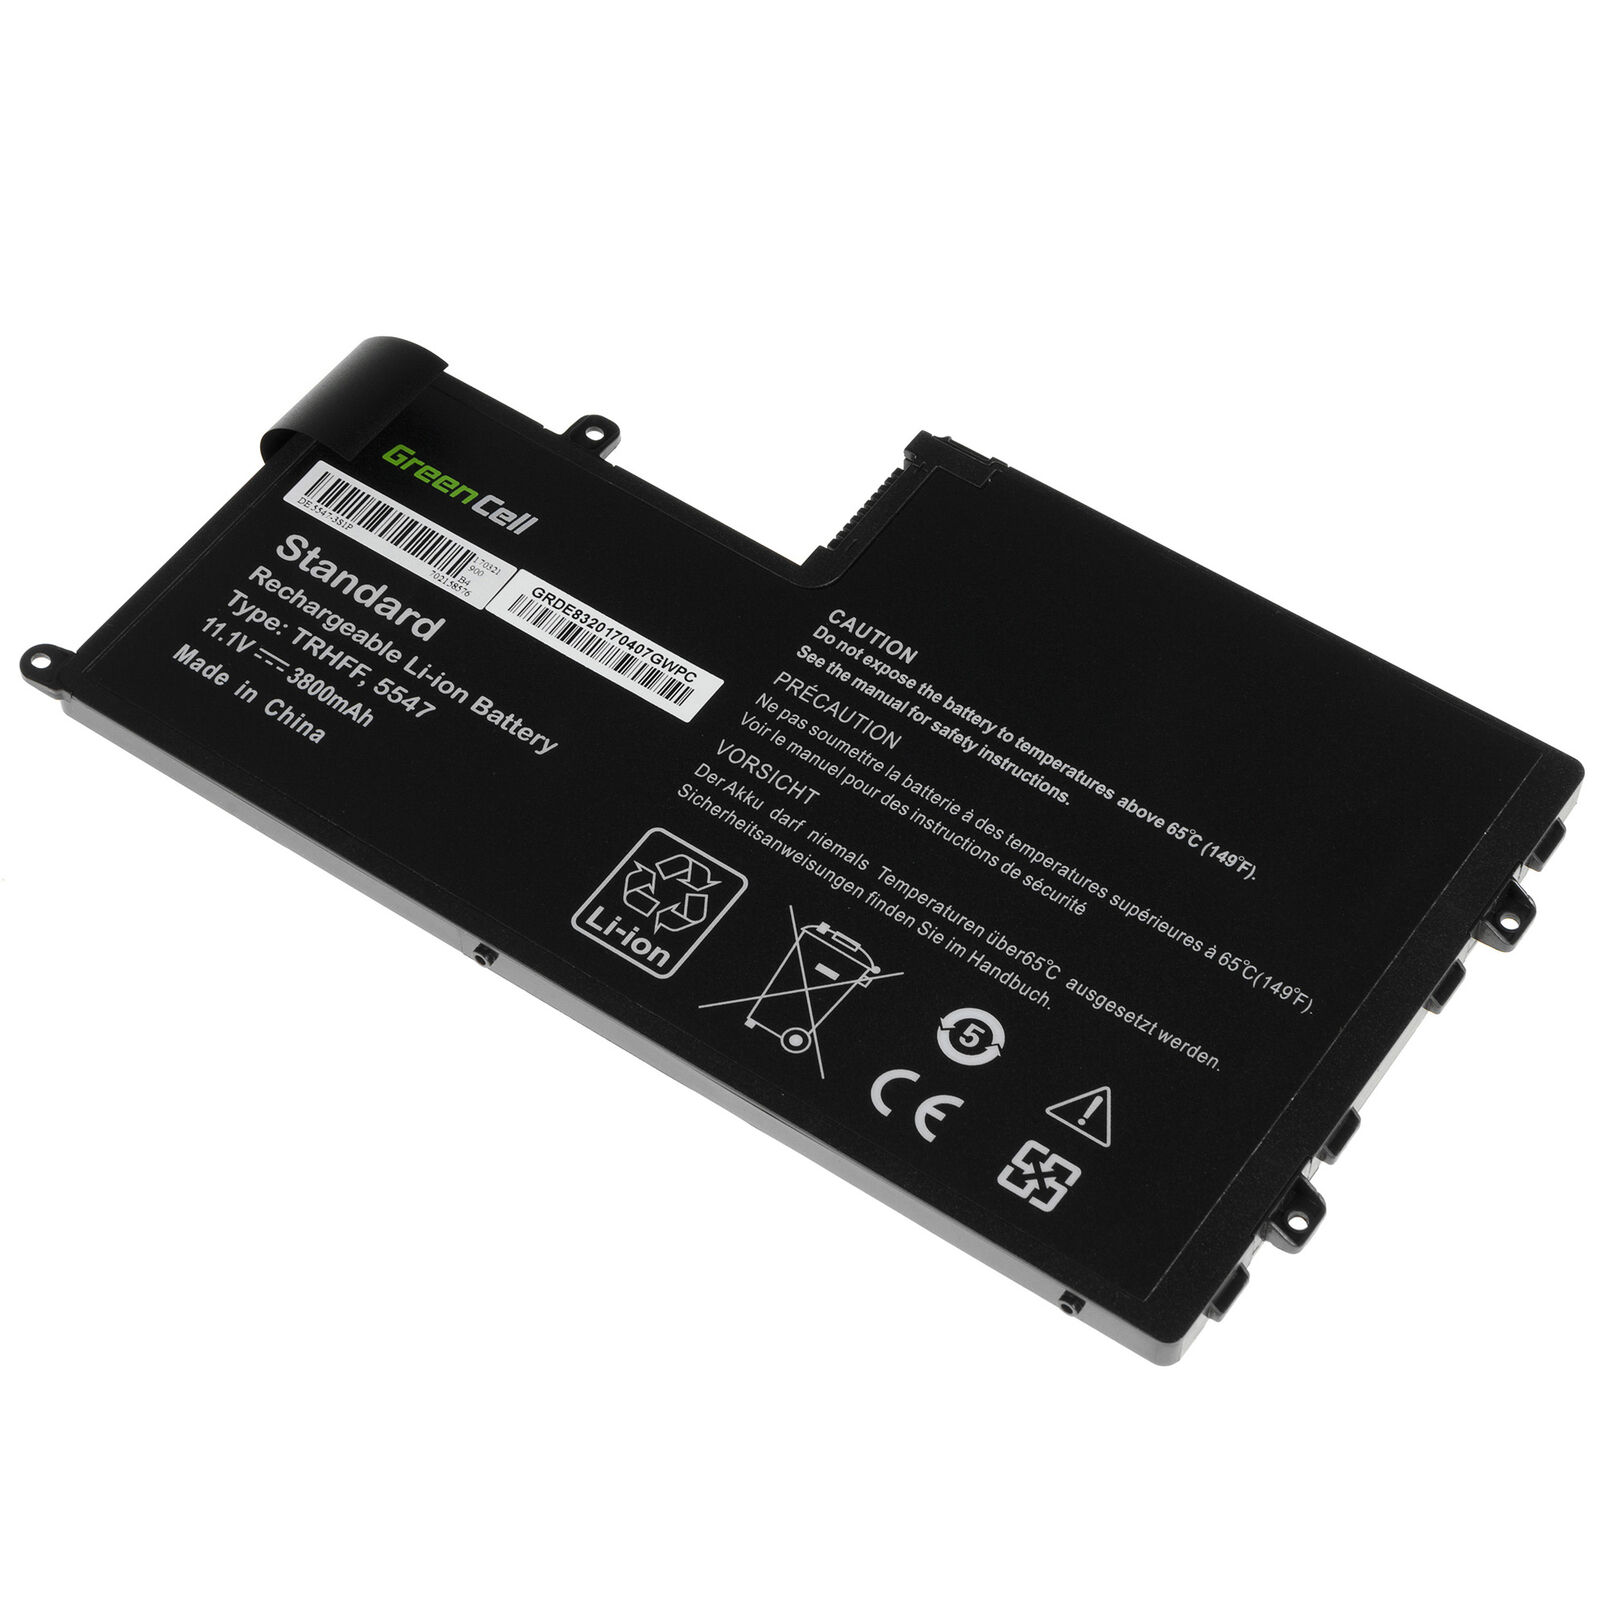 Dell Inspiron 15 5445 5447 5547 5547 Latitude 3450 3550 trhff compatible battery